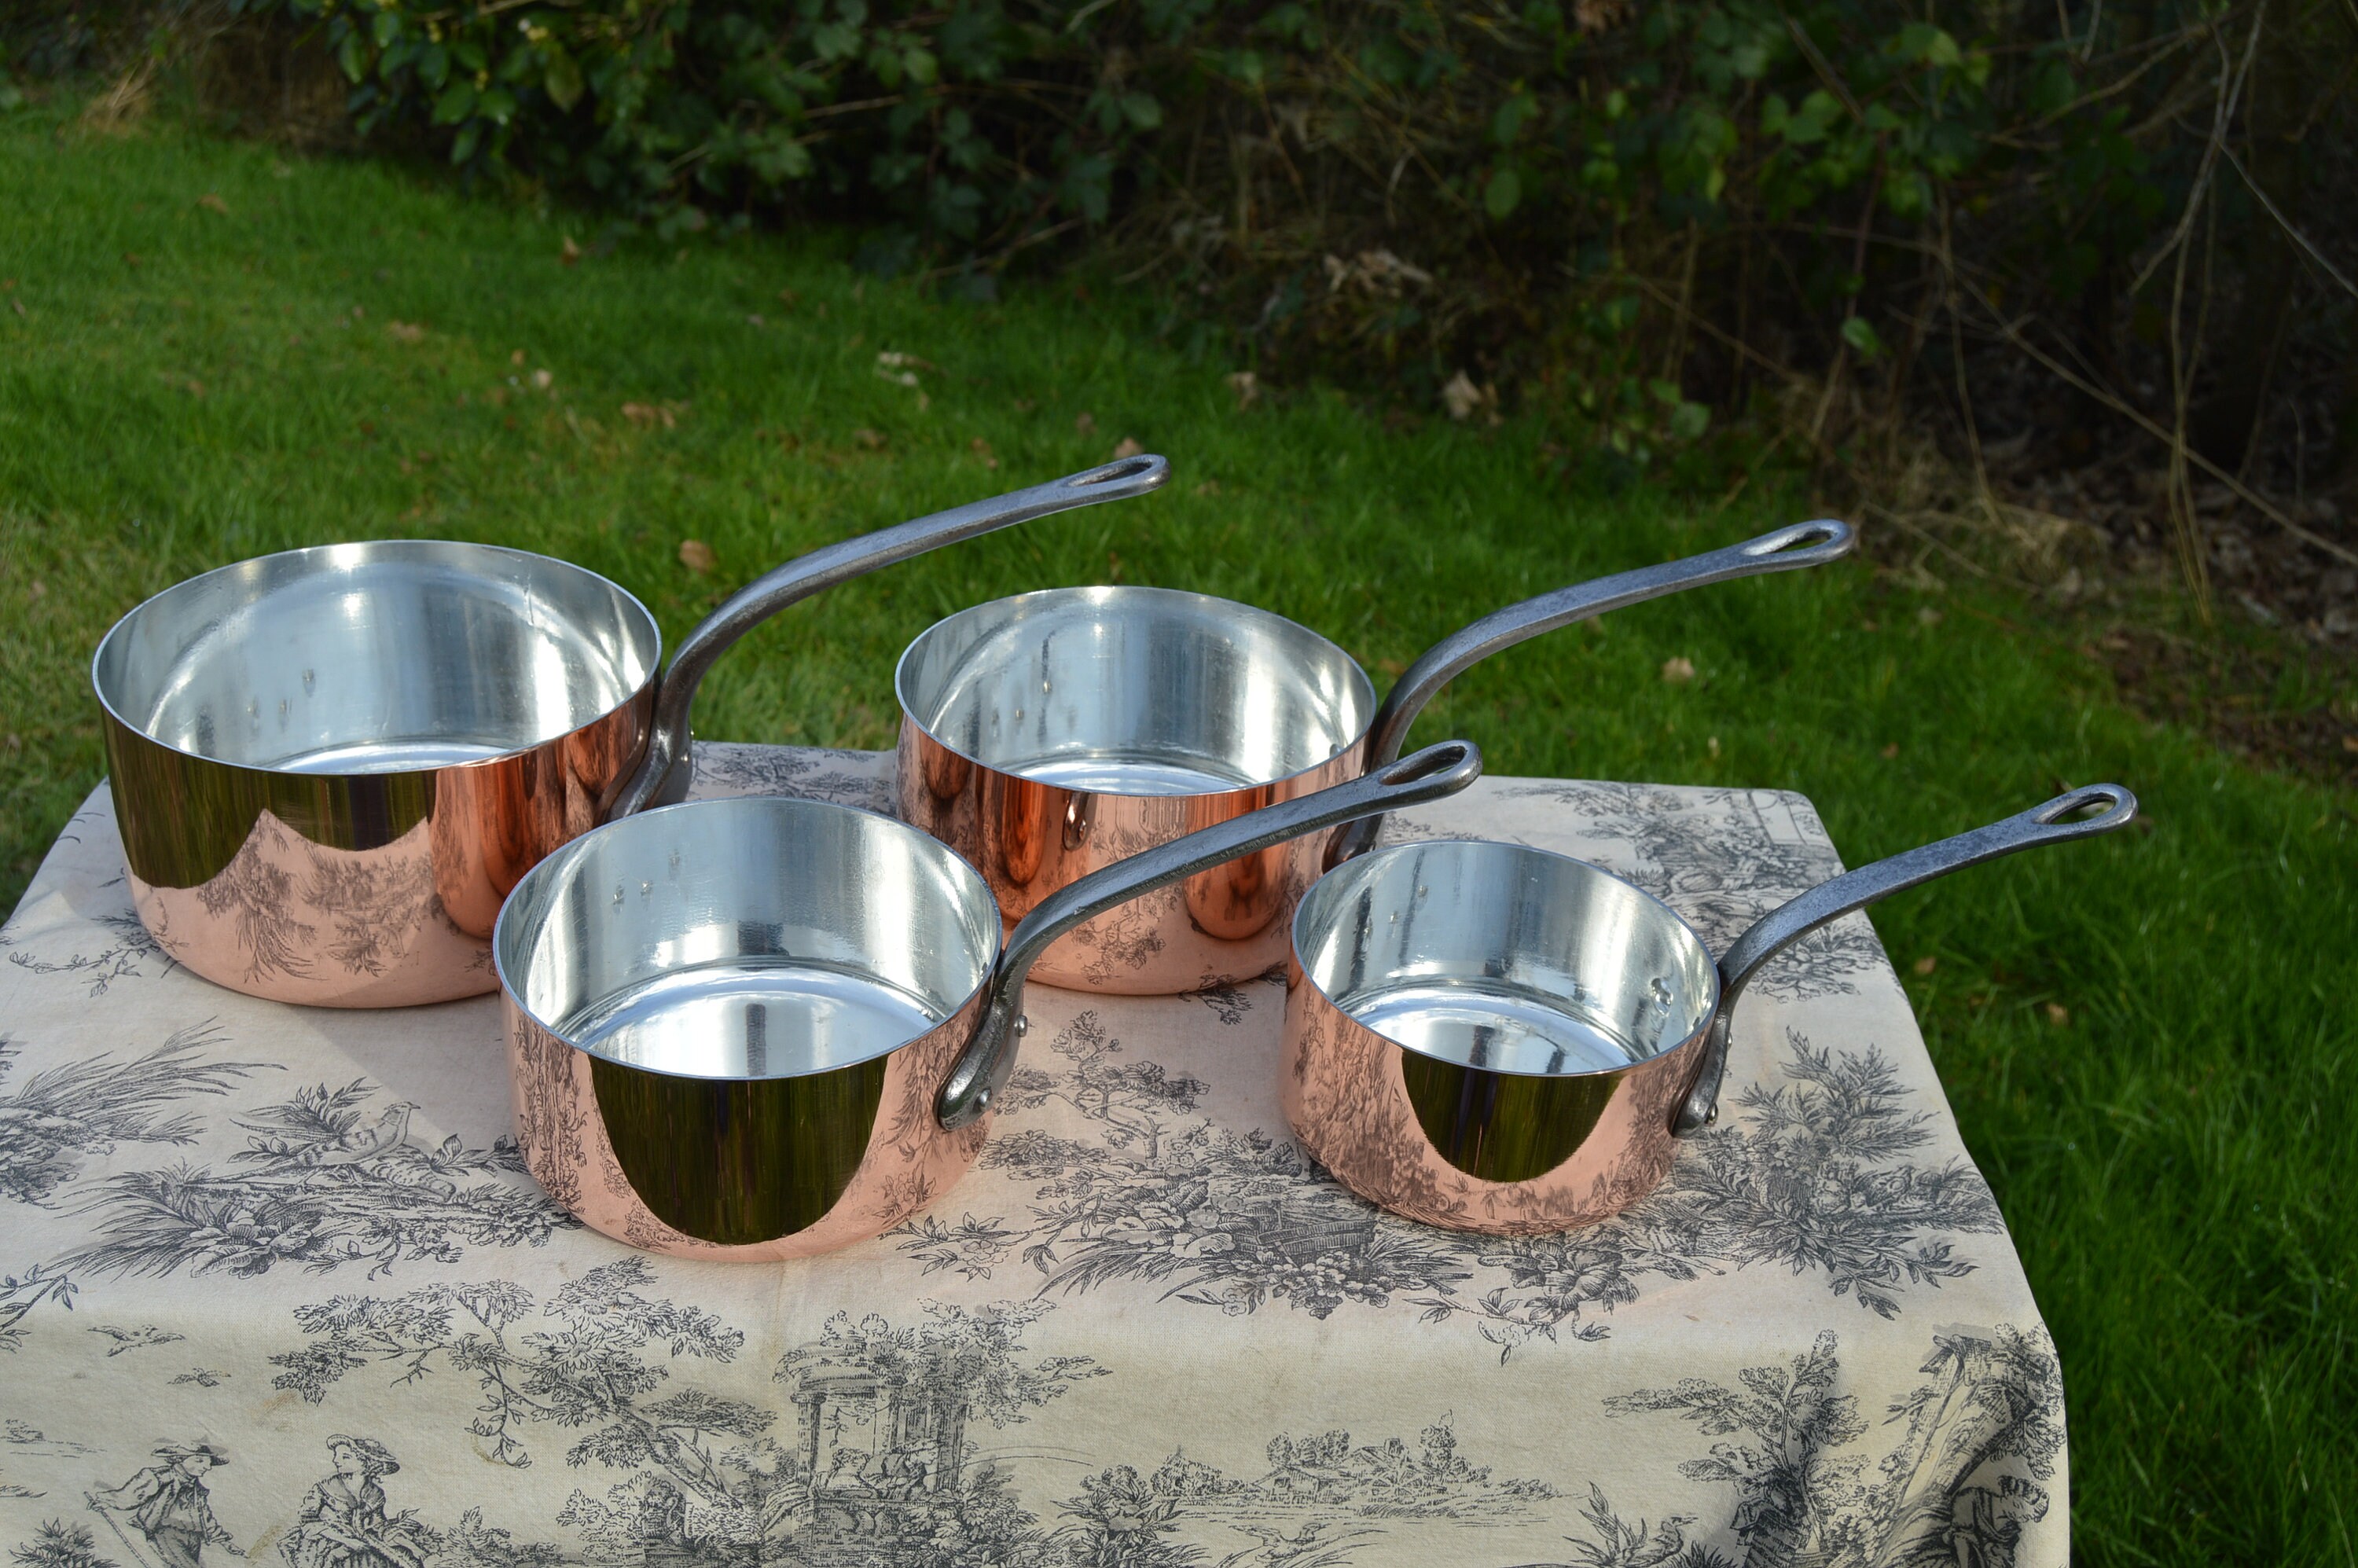 Small Vintage Copper Pots With Handles Three Heavy Graduated Sauce Pans Set  Copper Cookware 